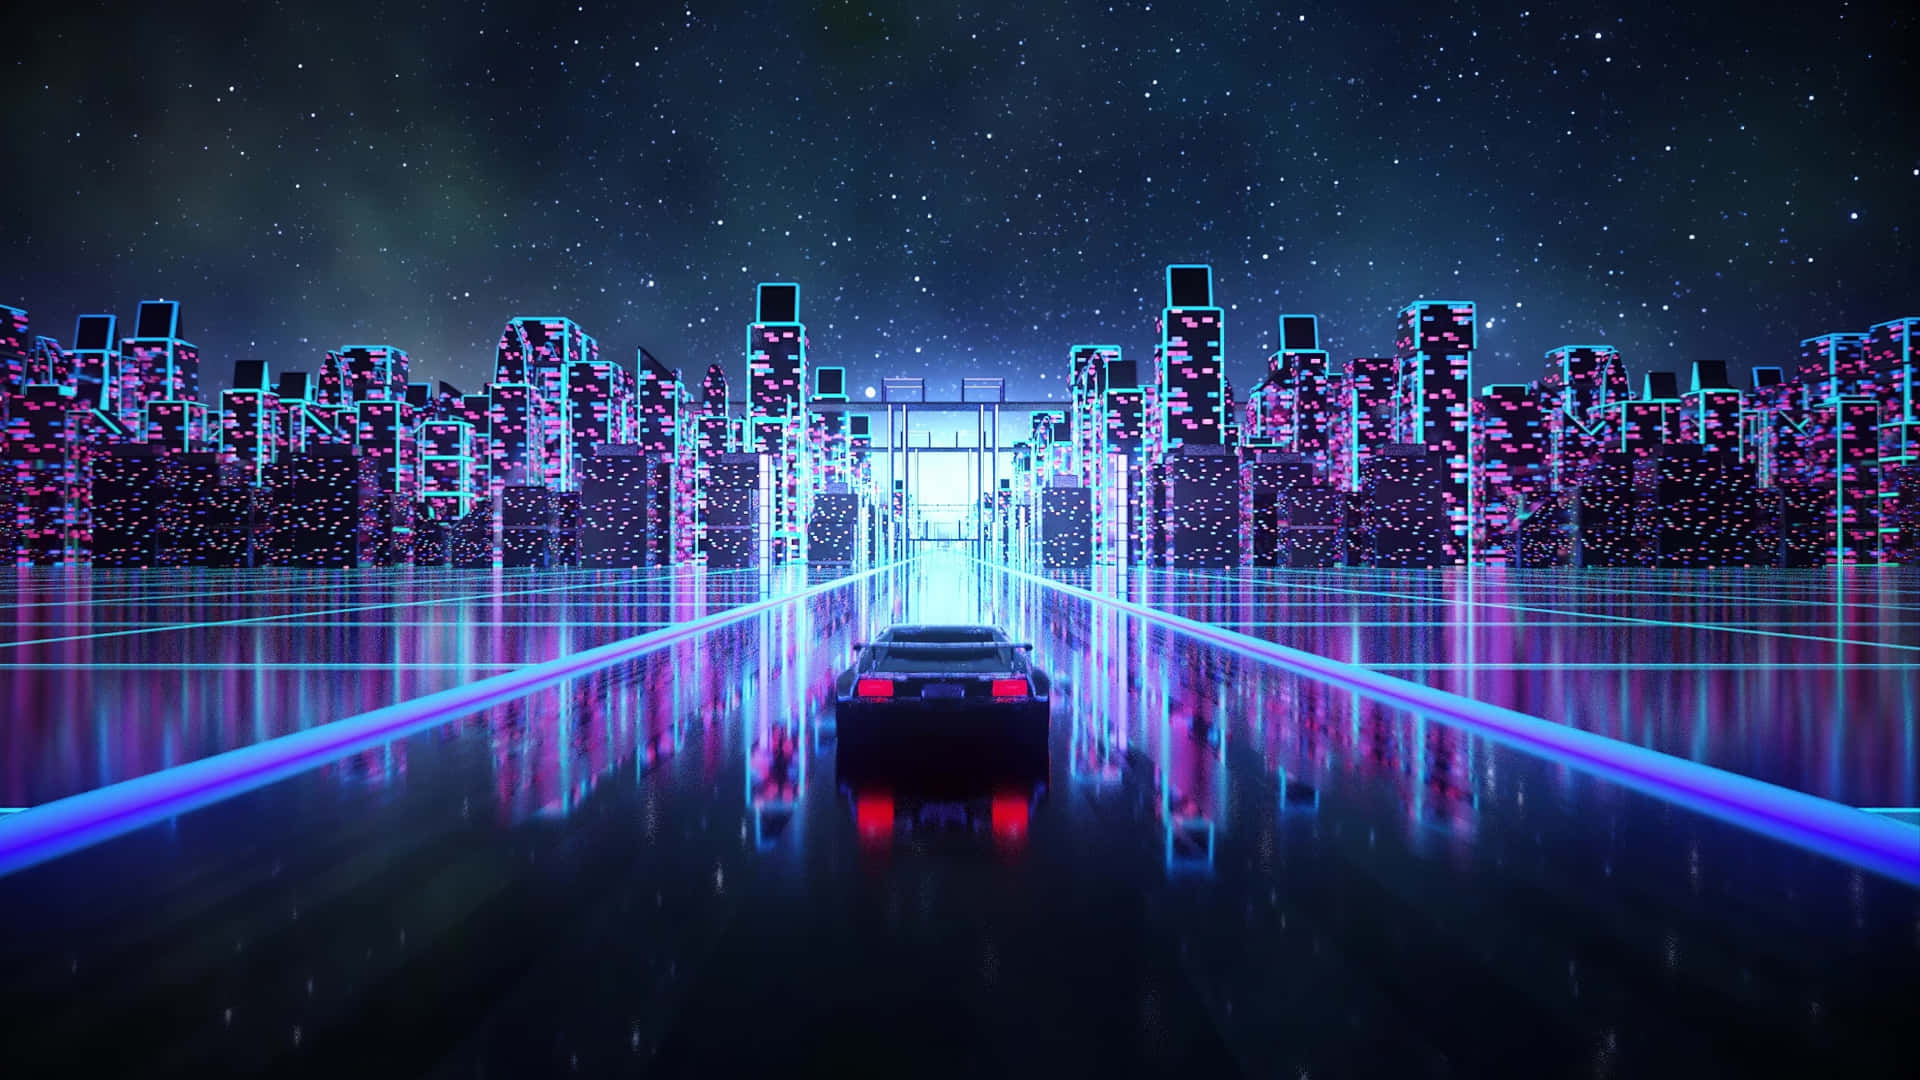 A Futuristic City With Neon Lights And A Car Wallpaper